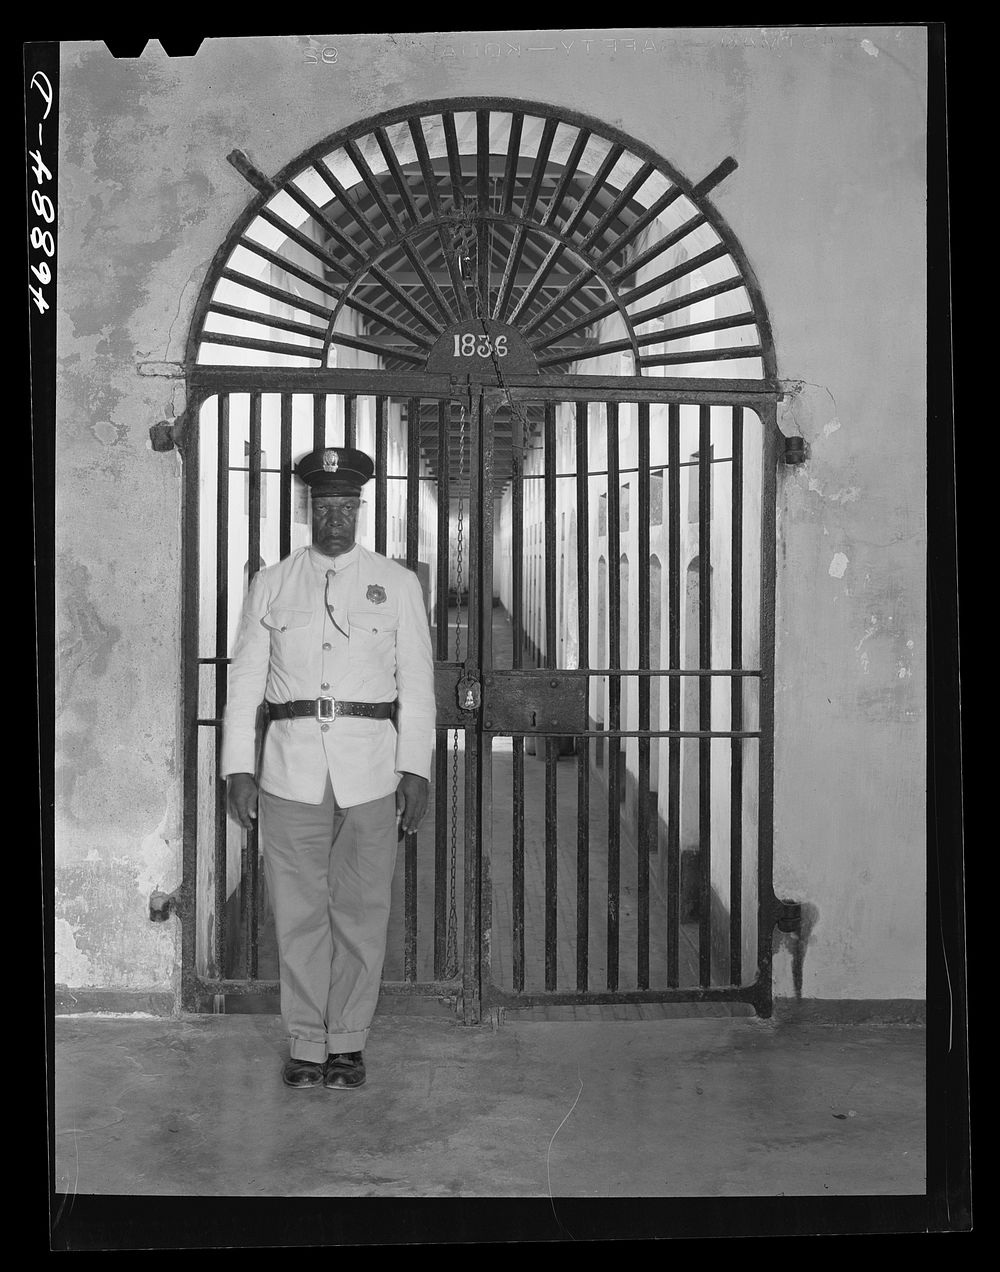 [Untitled photo, possibly related to: Christiansted, Saint Croix Island, Virgin Islands. In the prison]. Sourced from the…